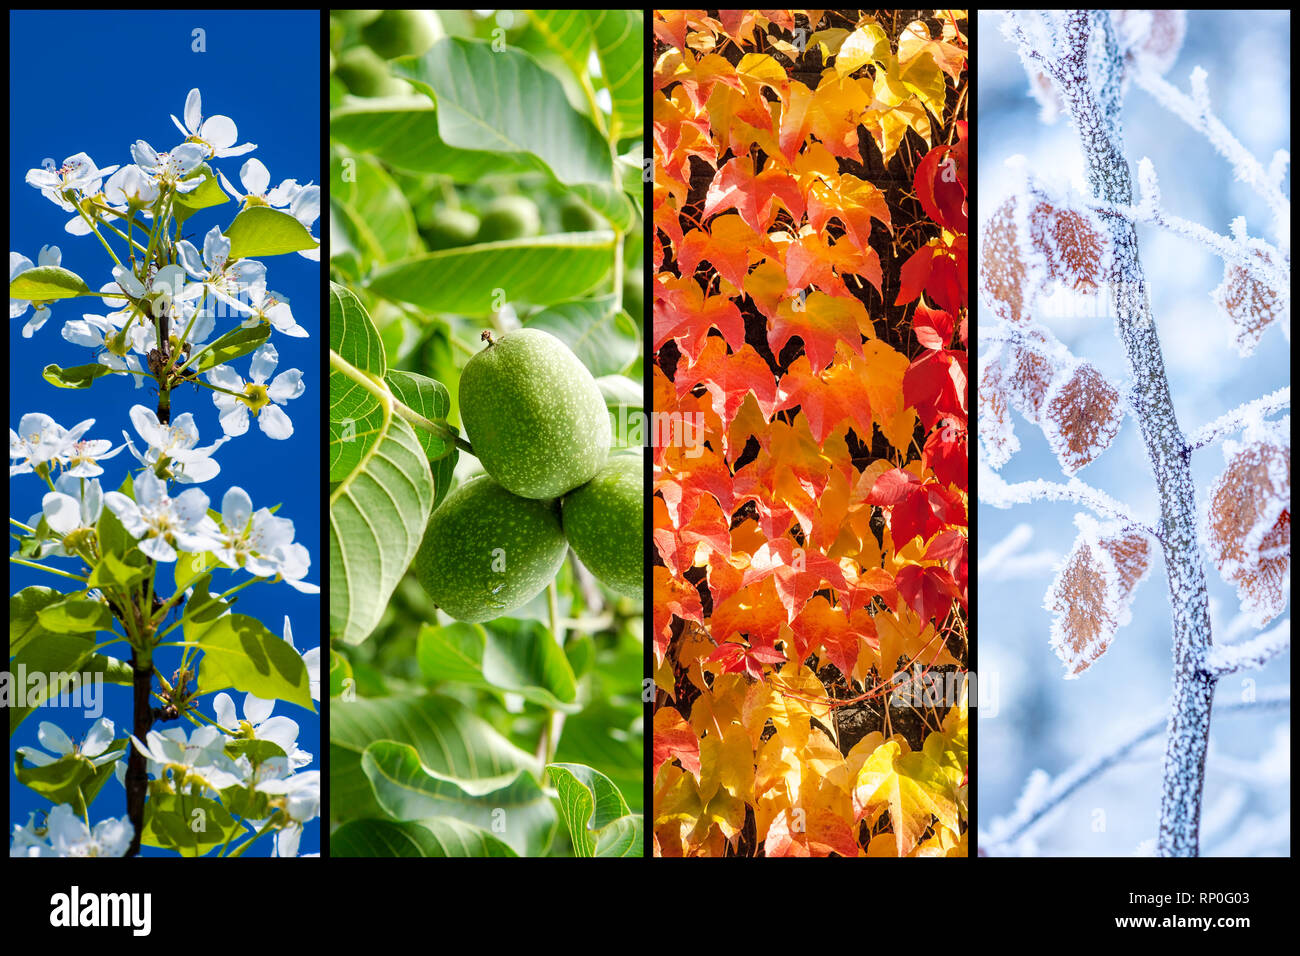 Collage of four pictures representing each season: spring, summer, autumn and winter. Stock Photo